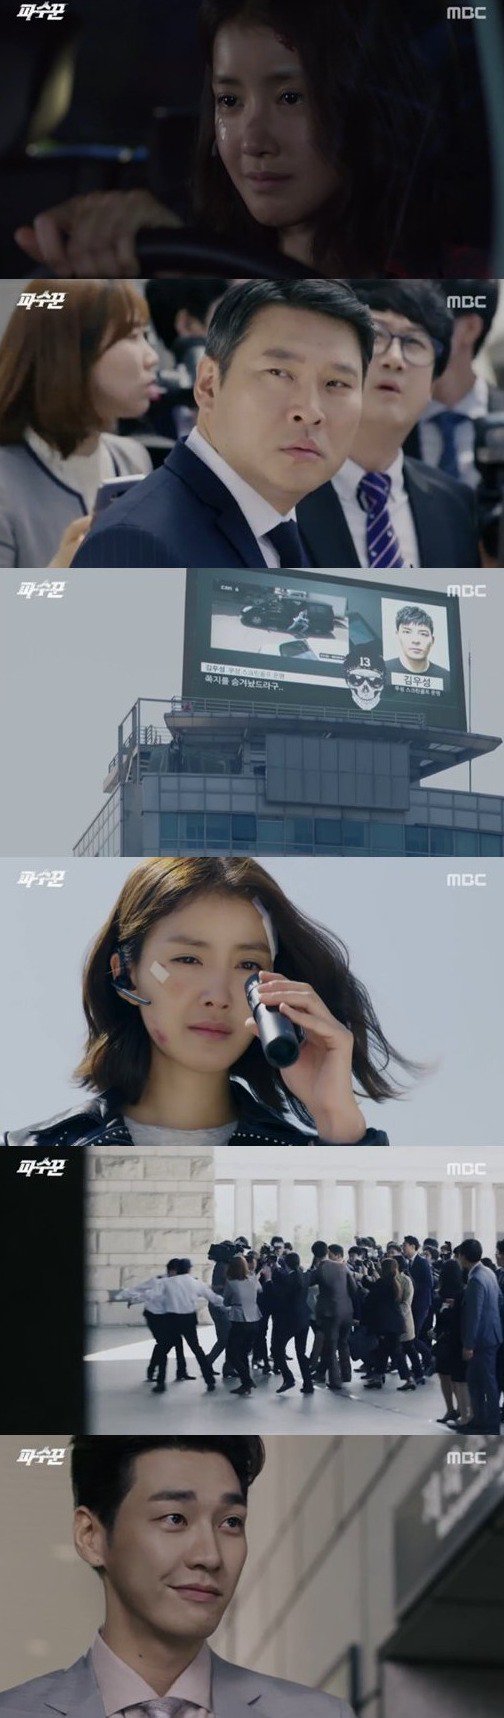 episodes 7 and 8 captures for the Korean drama 'Lookout'